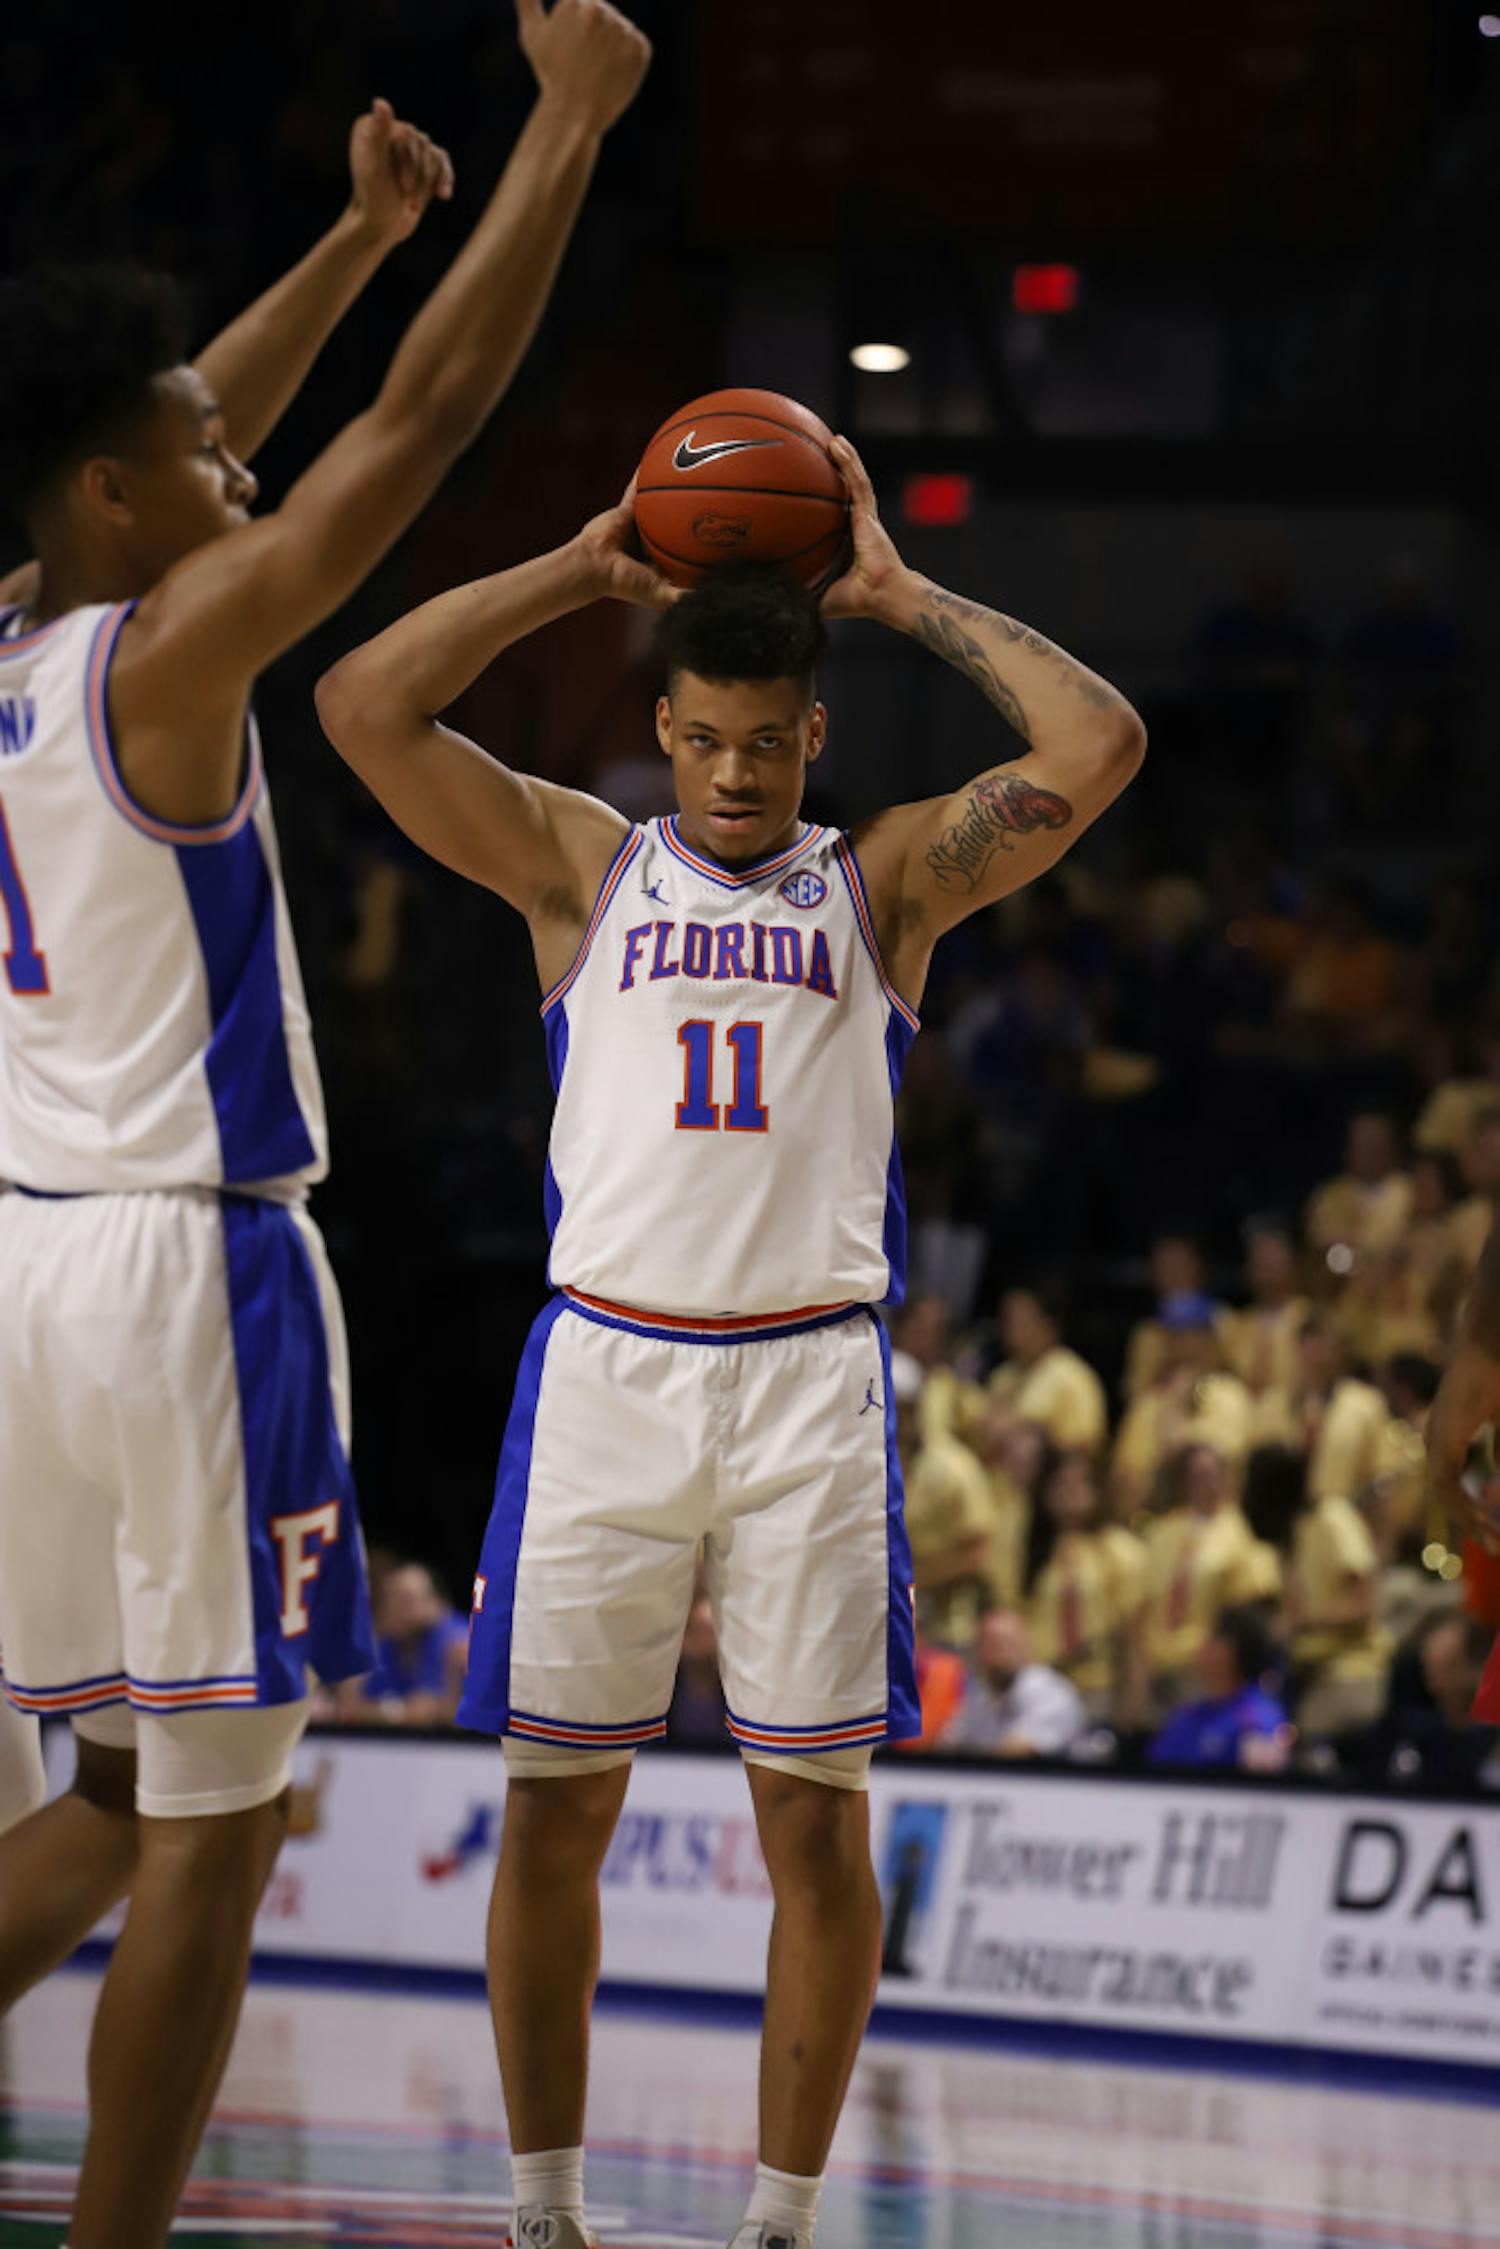 Junior Keyontae Johnson at the Gators' home game against Arkansas last season. Florida will allow up to 2,200 fans into the O'Connell Center for basketball games this season.